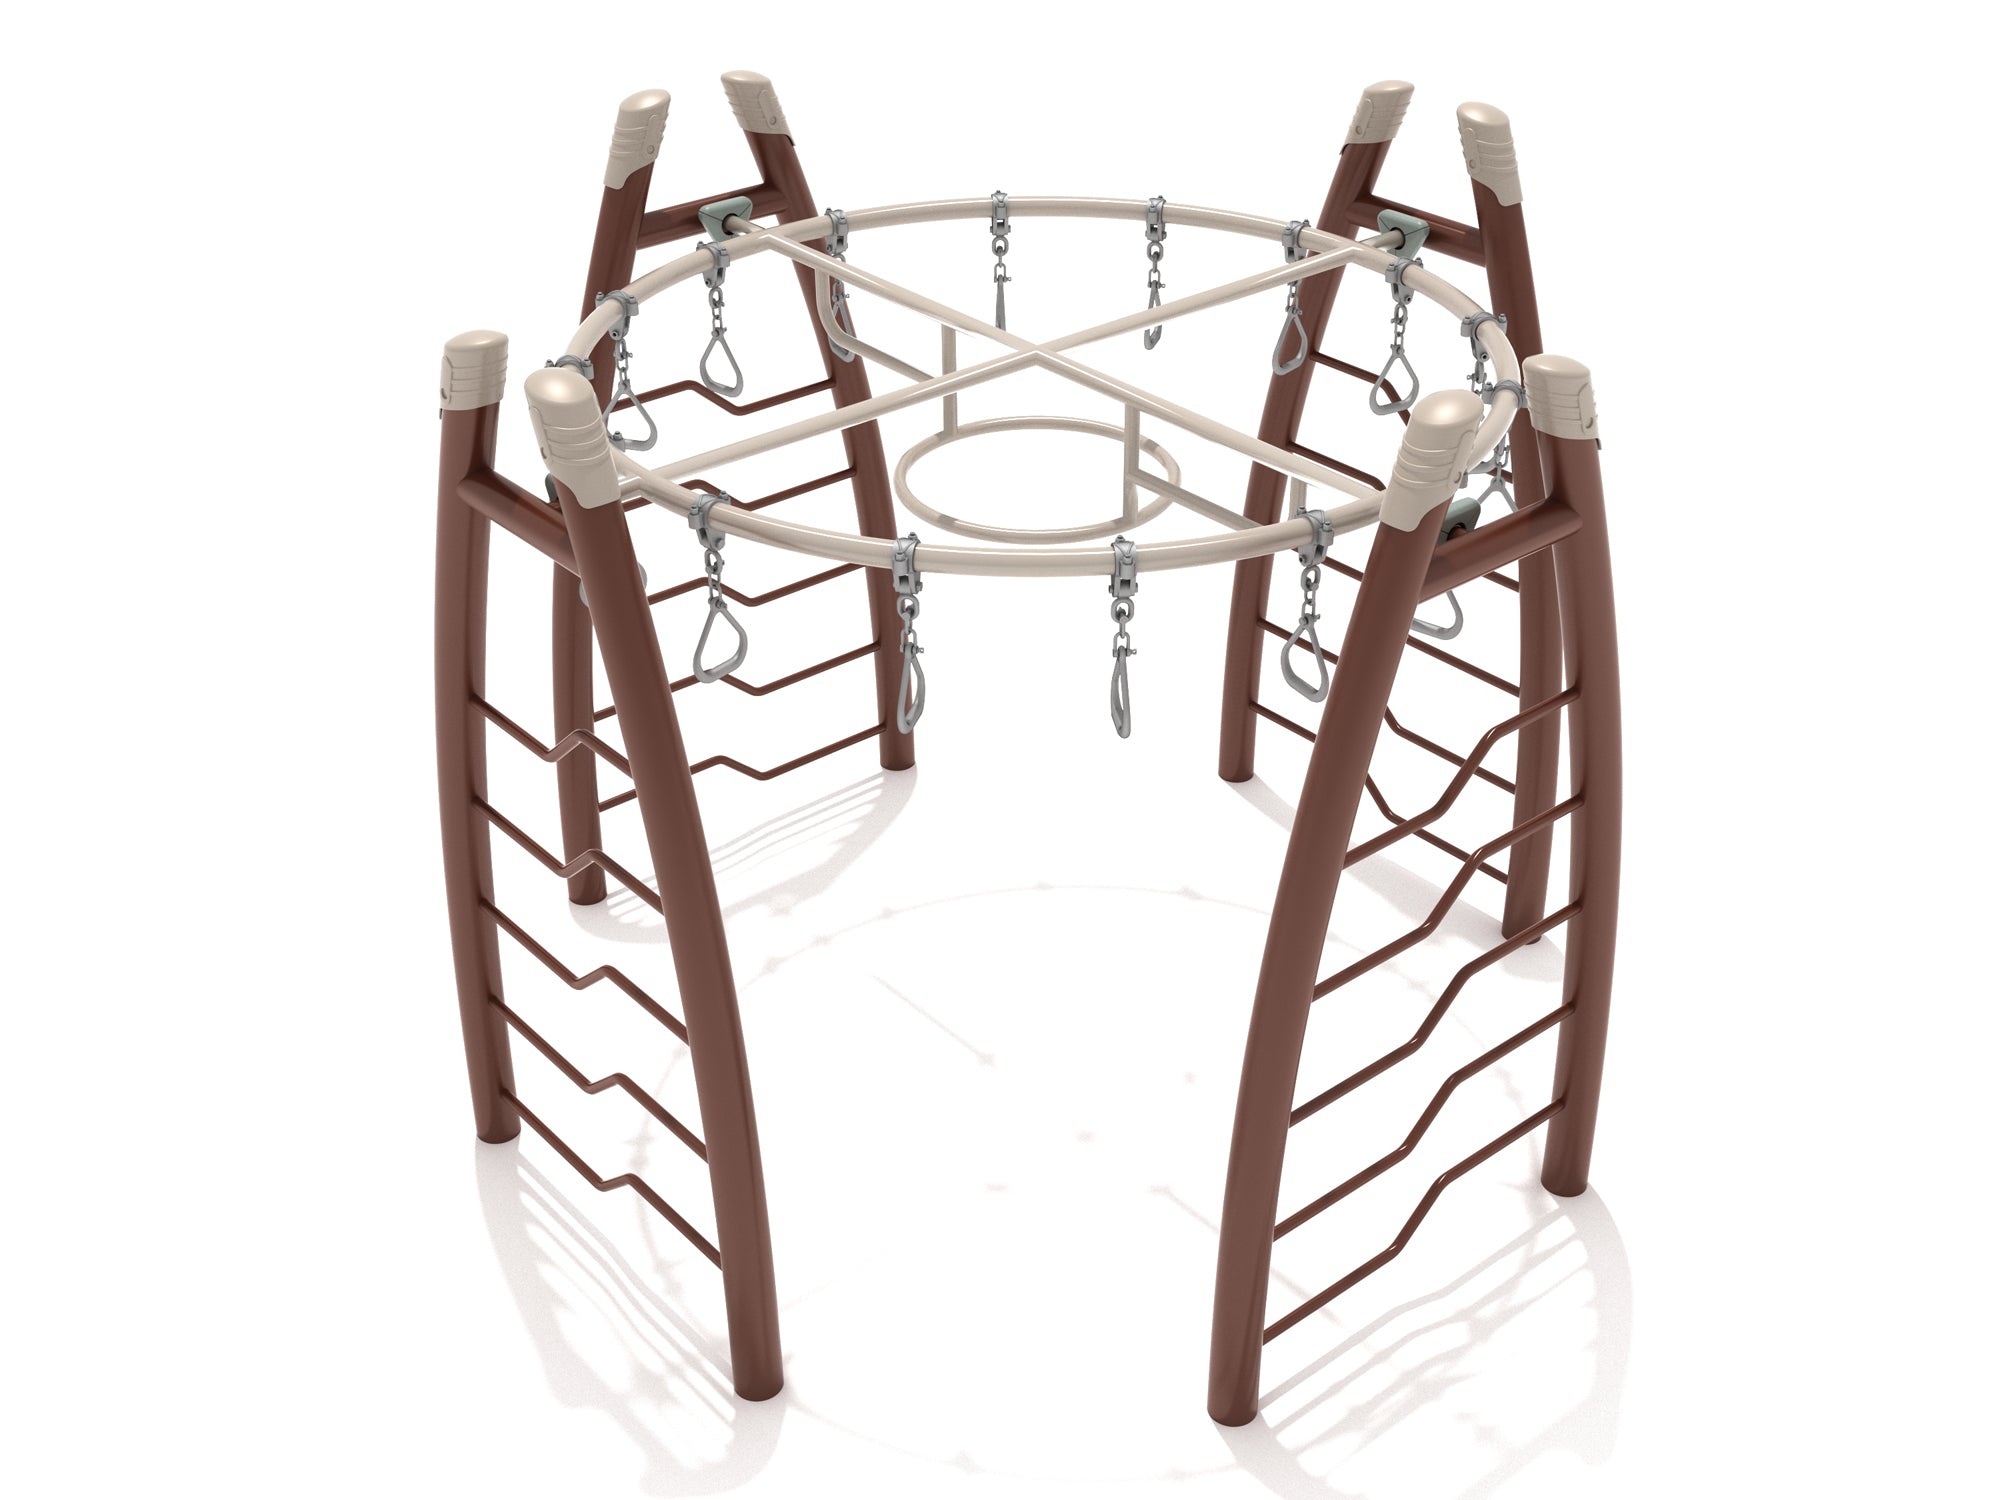 Playground-Equipment-Commercial-Curved-Post-Circle-Overhead-Swinging-Ring-Ladder